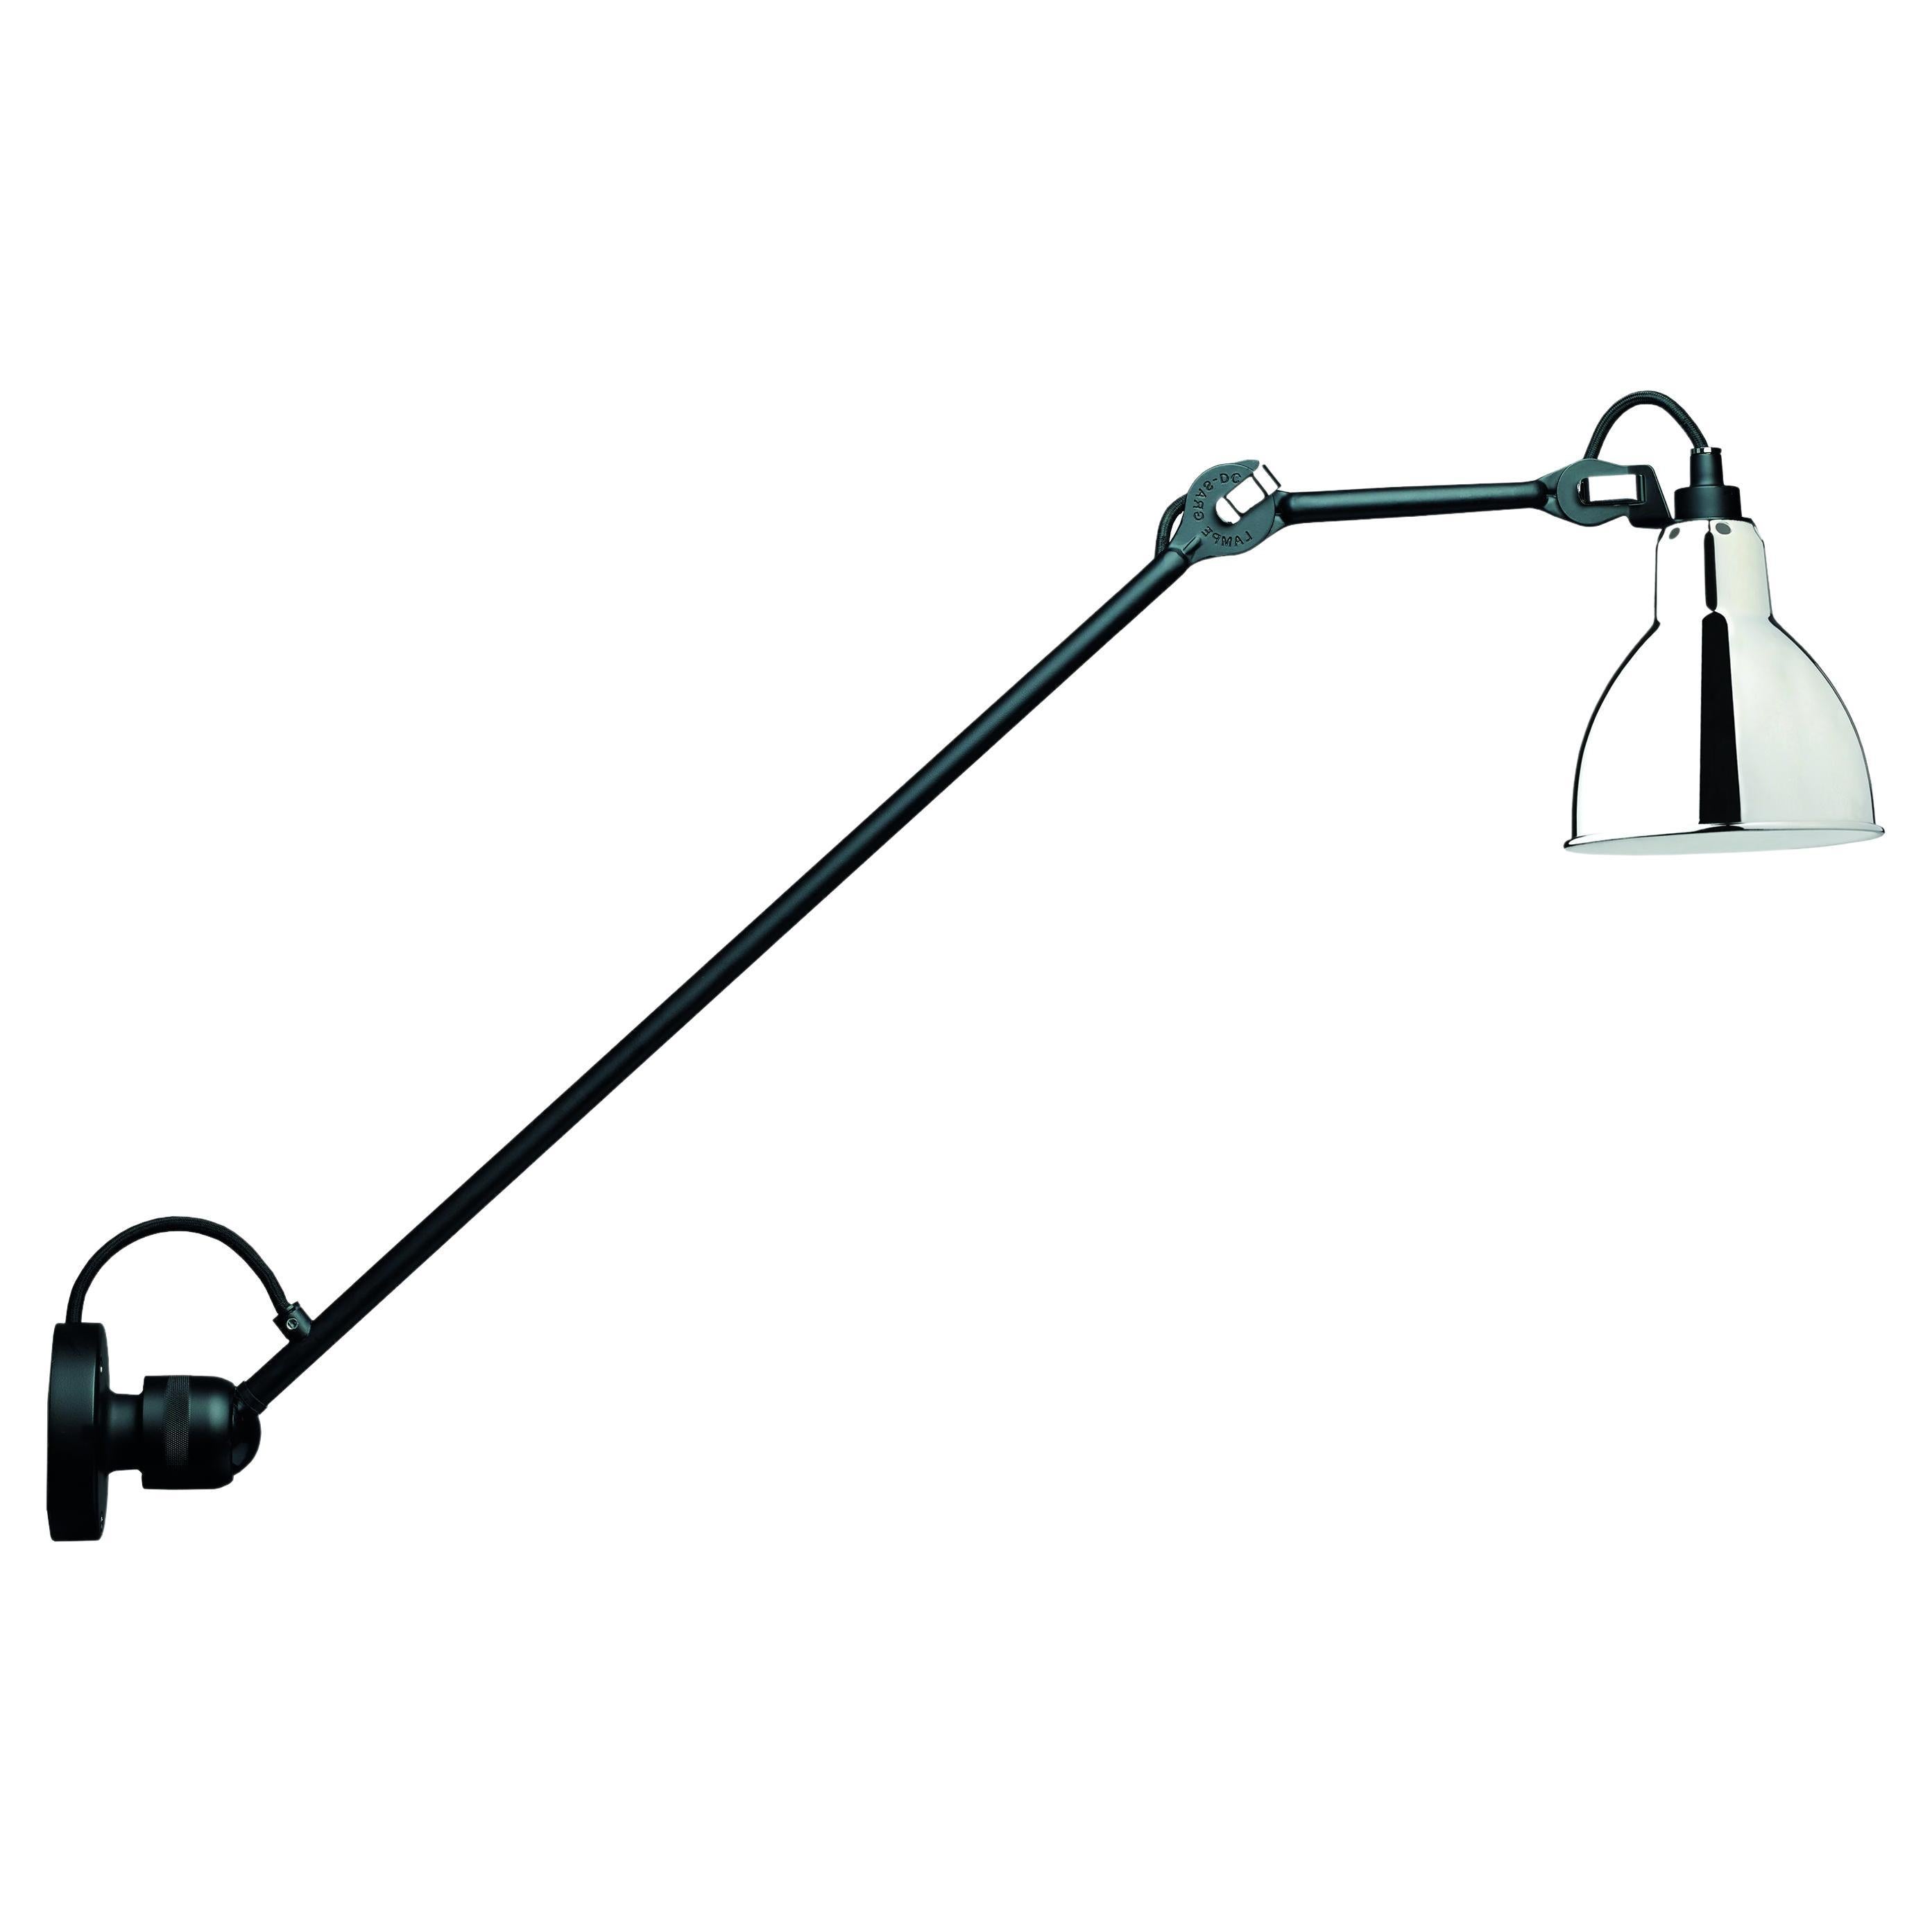 DCW Editions La Lampe Gras N°304 L60 Wall Lamp in Black Arm and Chrome Shade For Sale